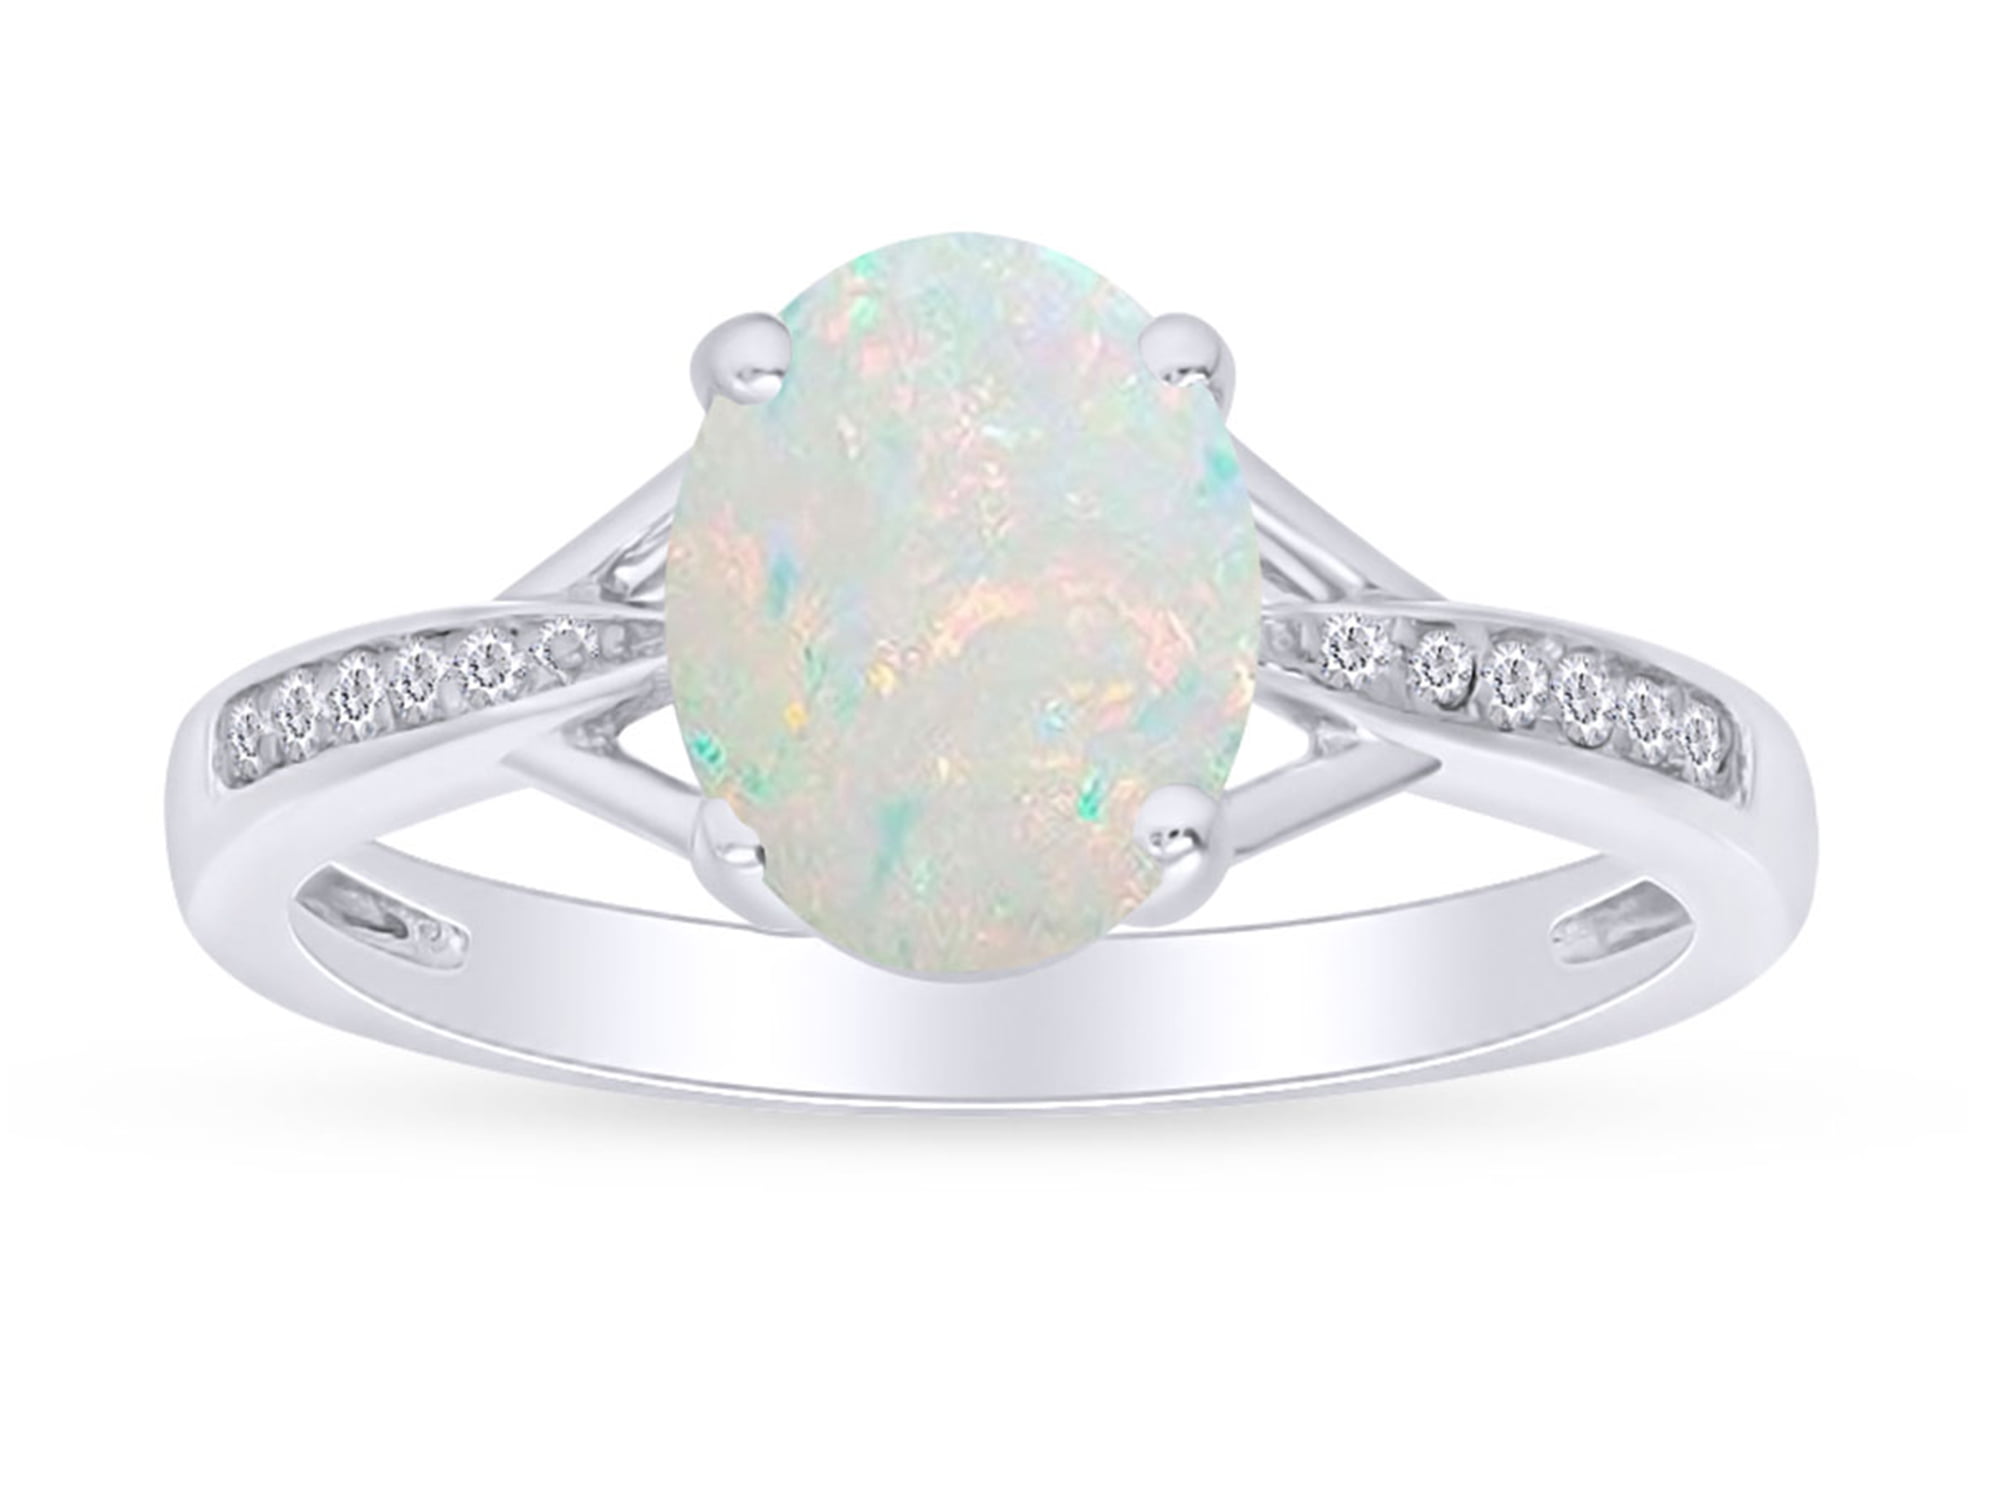 Oval Cut Lab Created Opal Gemstone And Natural Diamond Accents Split Shank Engagement Ring In 14k White Gold Over Sterling Silver Jewelry For Women